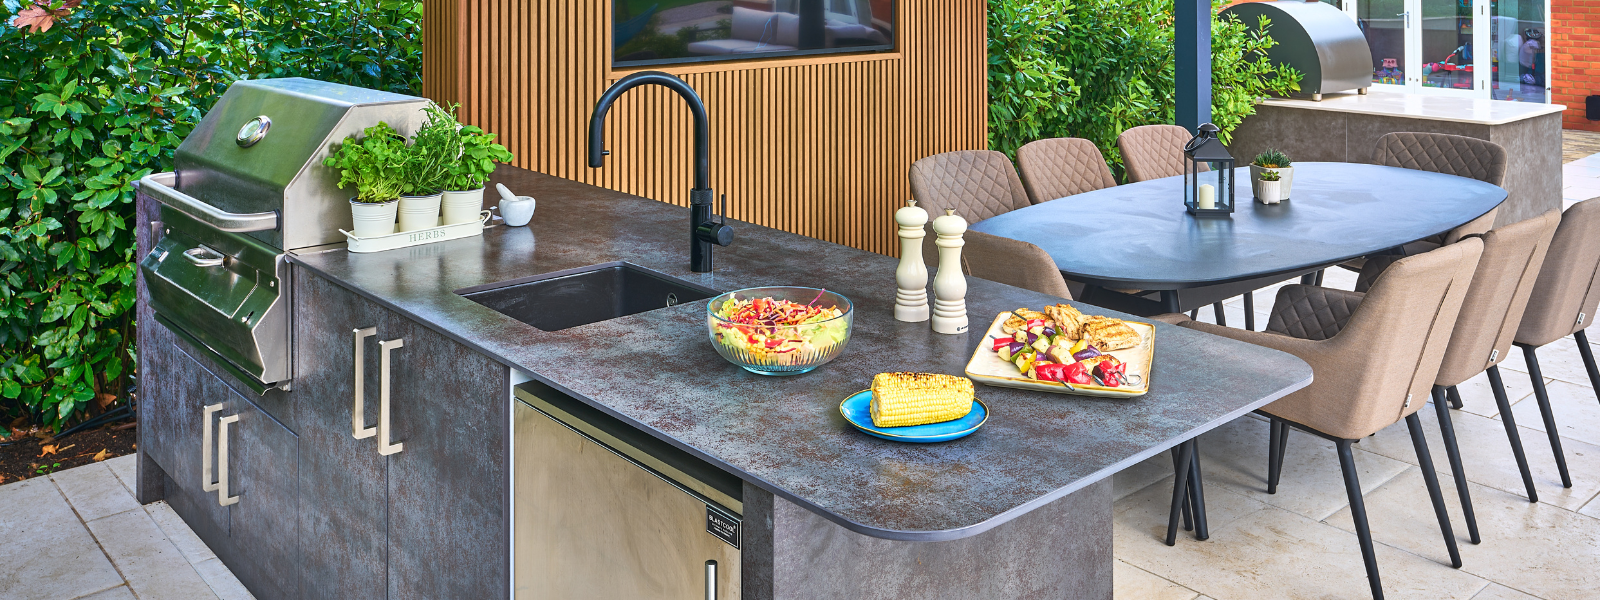 Outdoor kitchens made from high quality weatherproof composite